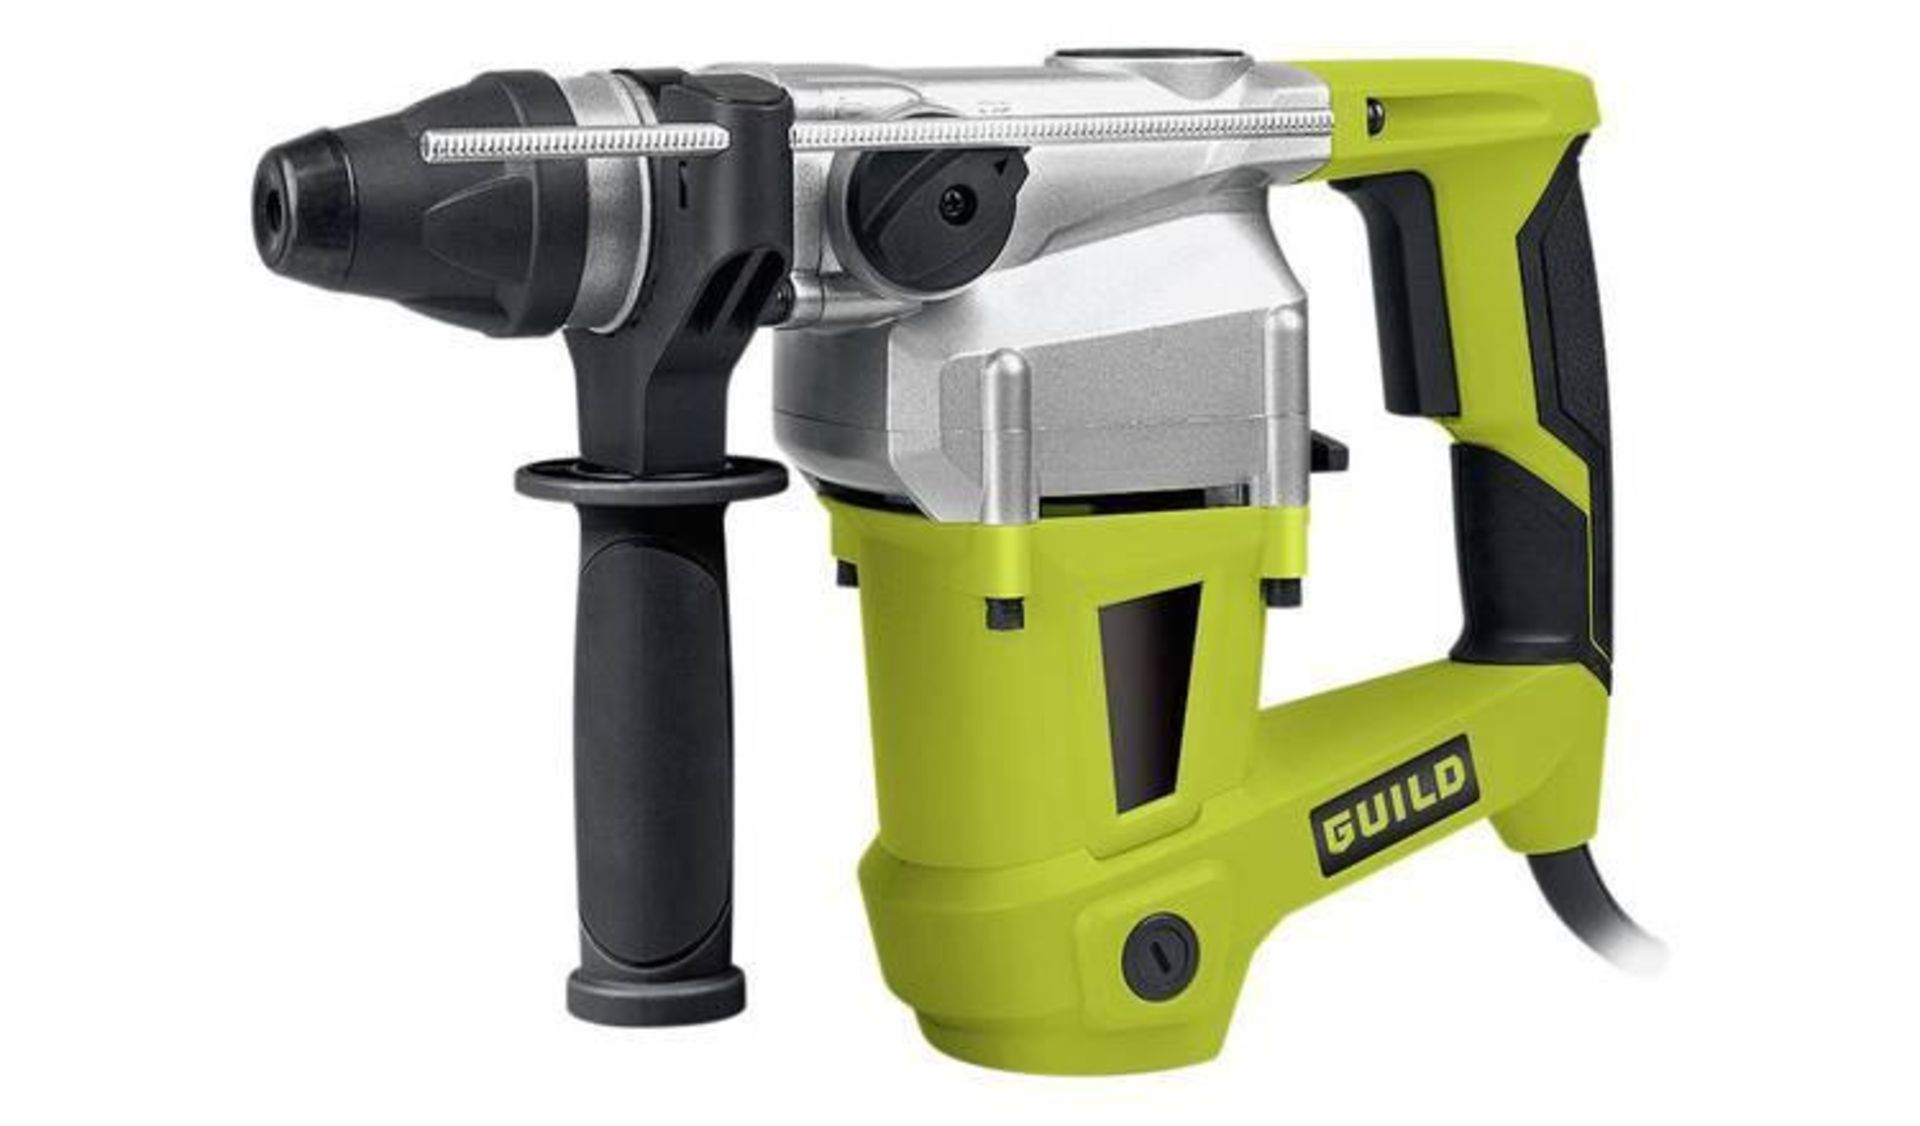 Guild Corded SDS Rotary Hammer Drill - 1000W PDH26G £50.00 RRP